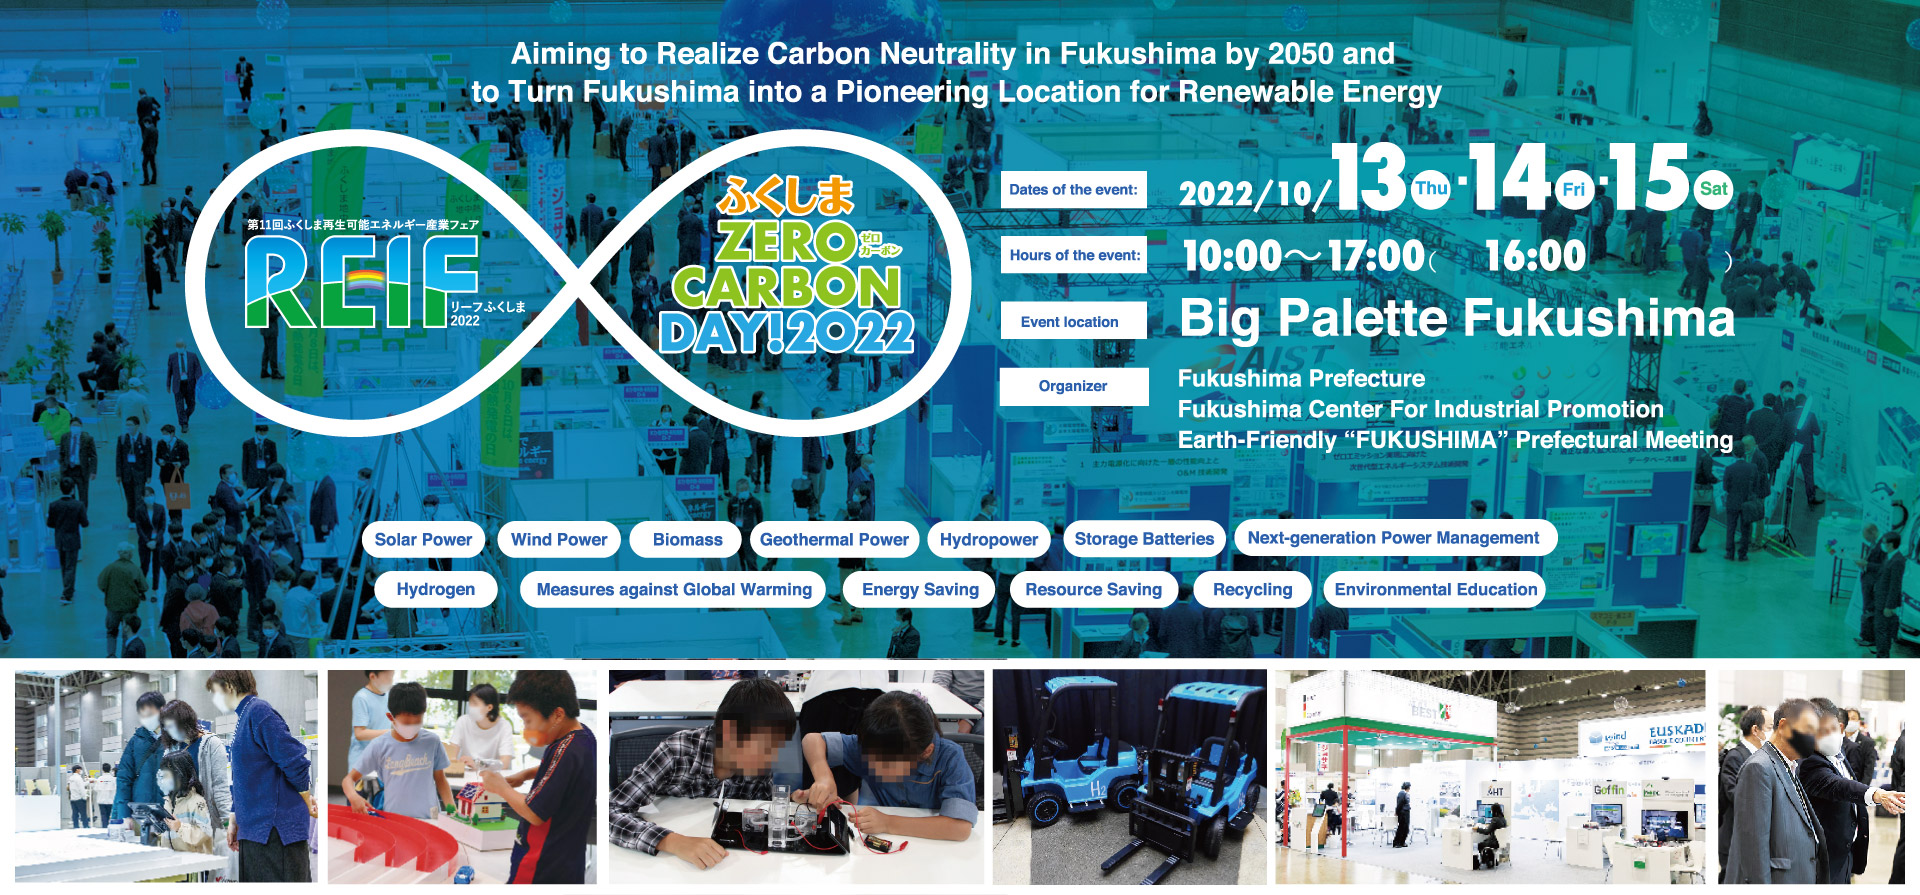 Aiming to Realize Carbon Neutrality in Fukushima by 2050 and to Turn Fukushima into a Pioneering Location for Renewable Energy